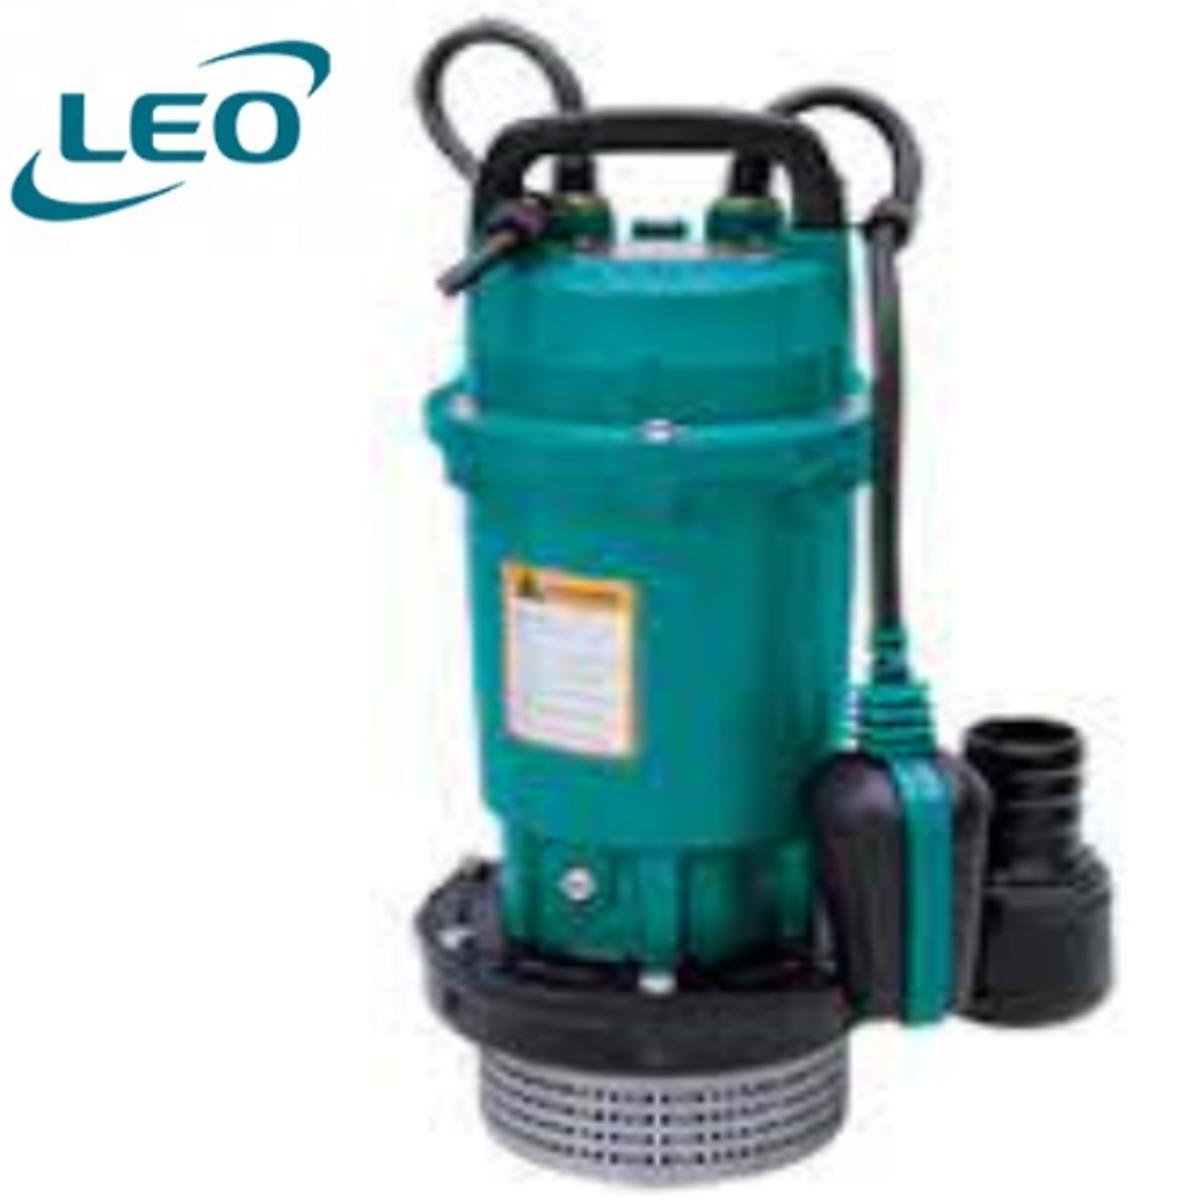 LEO - QDX-1.5-15-0.37LA - 370 W - 0.5 HP - HIGH PRESSURE ALUMUNIUM BODY Submersible Pump With FLOAT SWITCH FOR AUTOMATIC OPERATION - European STANDARD Water Pump